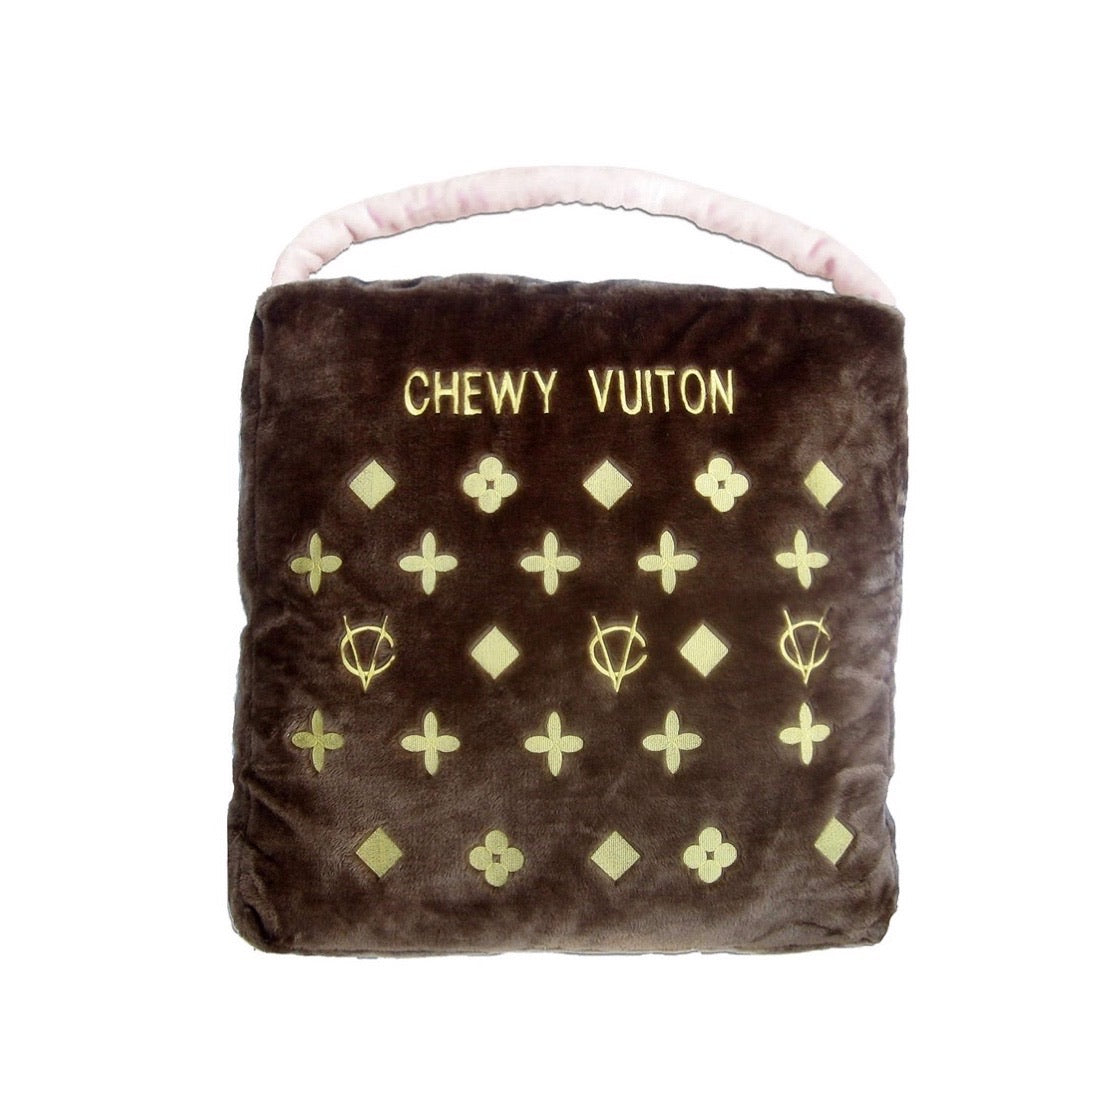 Chewy Vuitton Robe, Pillow and Blanket